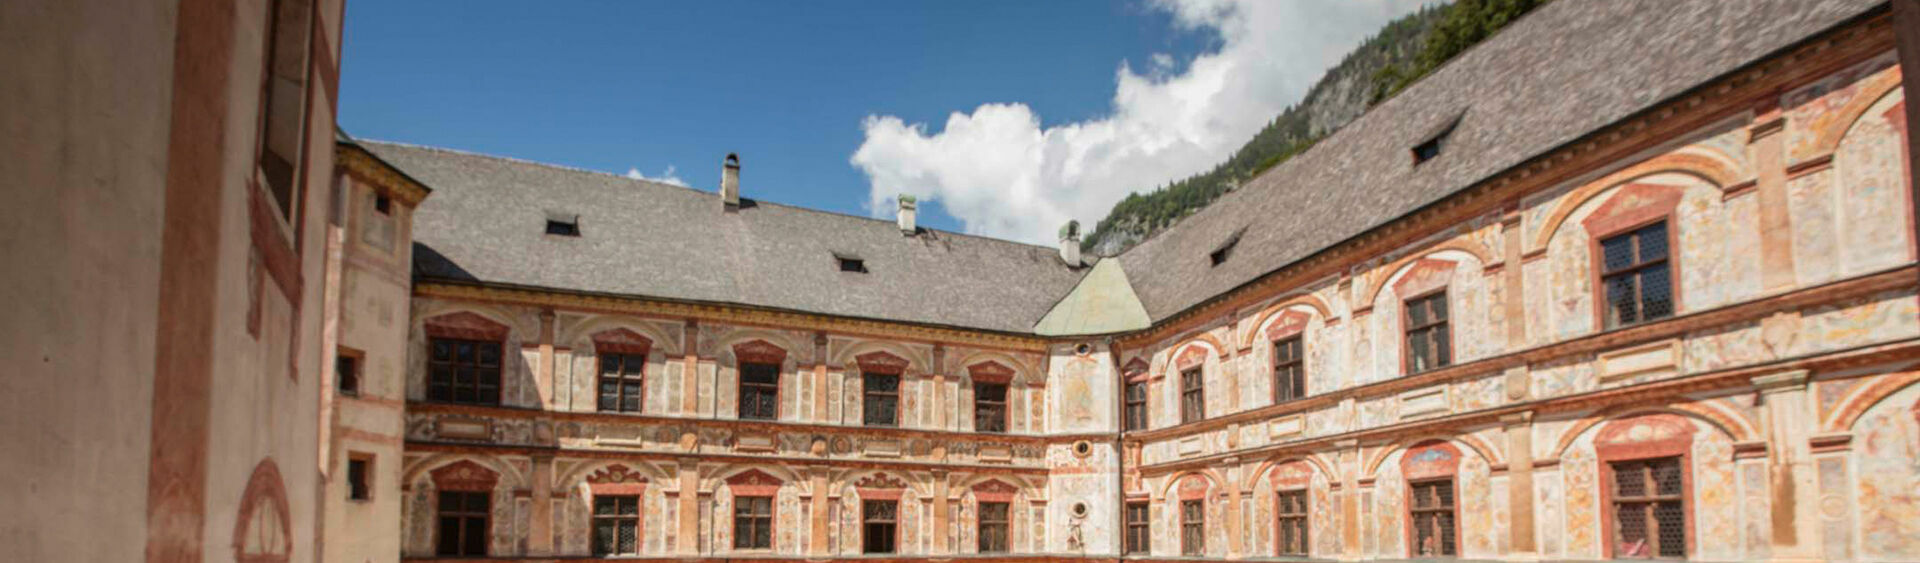 The courtyard of the Tratzberg Castle. Located near Schwaz, the fairy tale castle towers majestically above the valley.